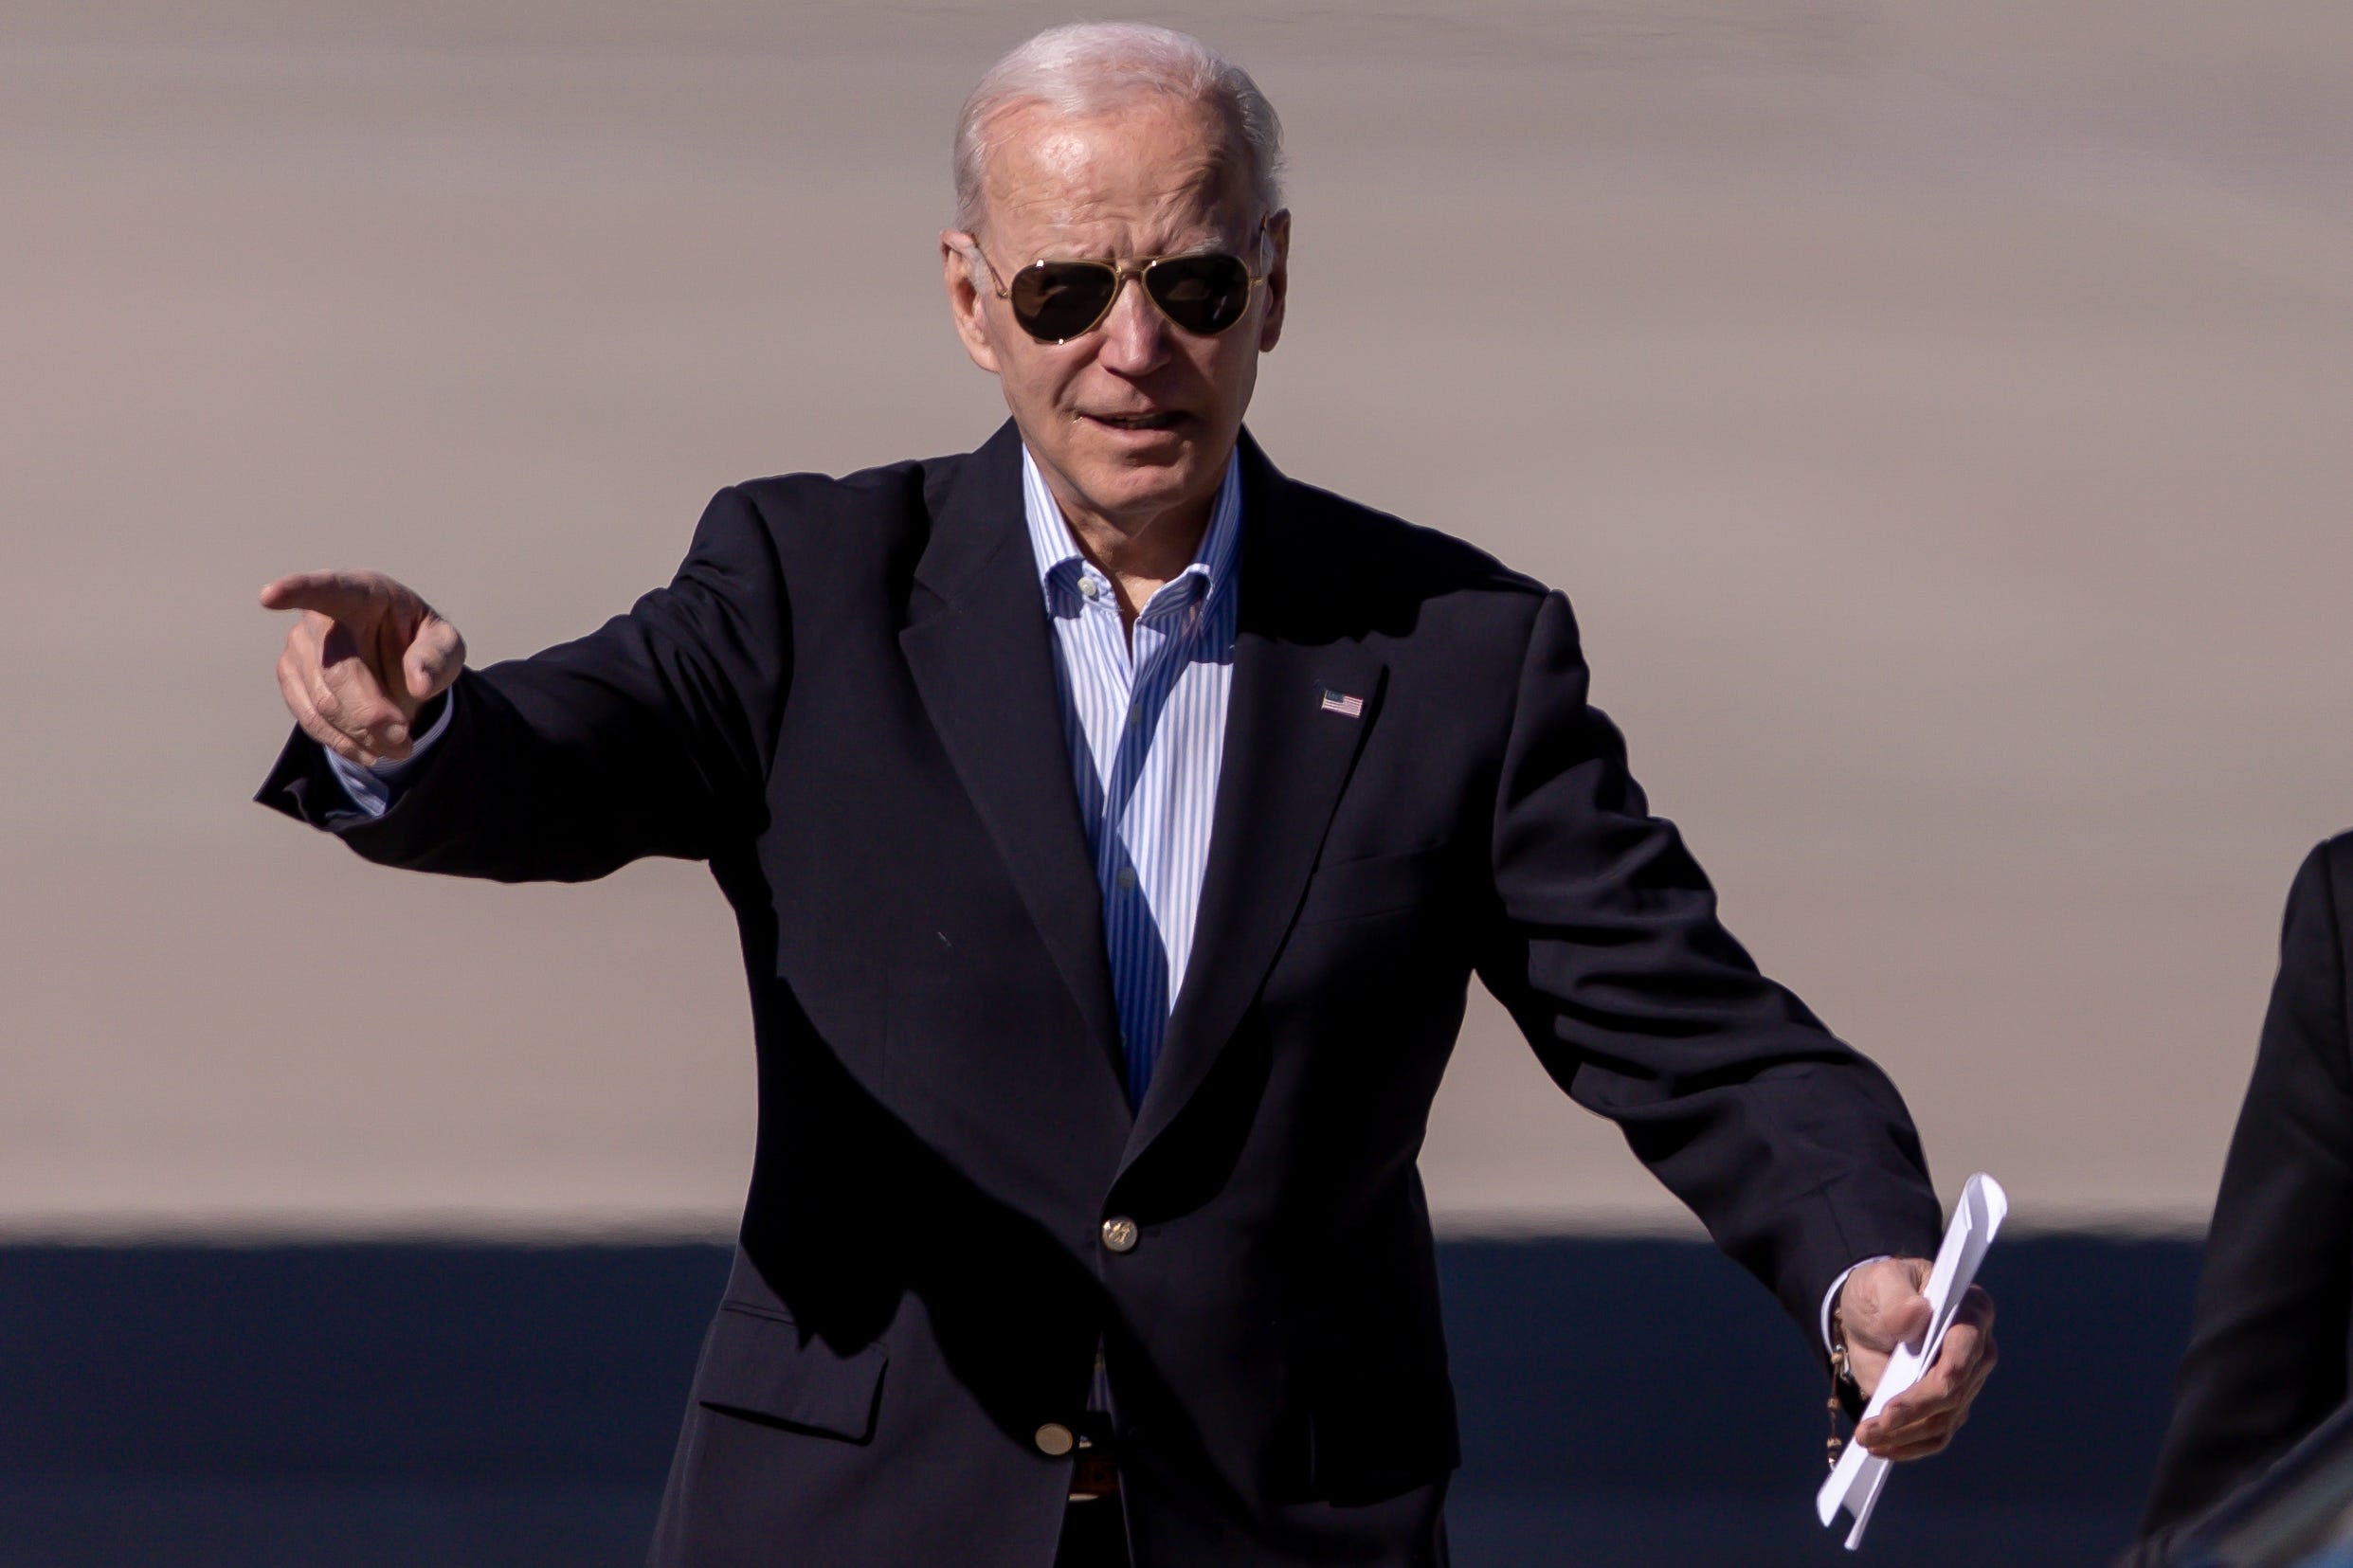 Did Biden drop out of the race? Texas leaders react to president ending bid for reelection